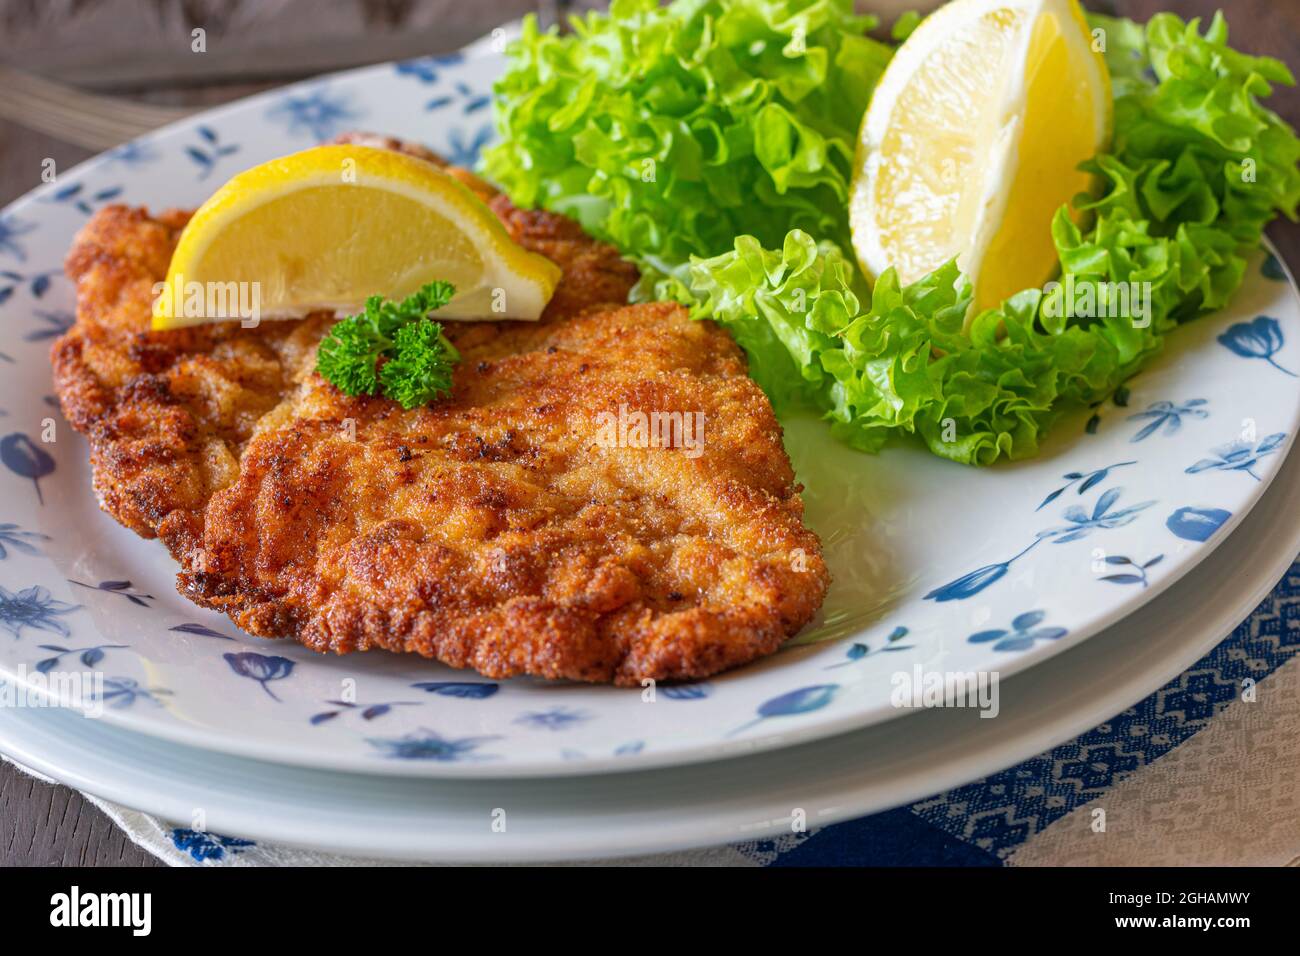 Breaded pork schnitzel on a plate with lemon and garnish Stock Photo